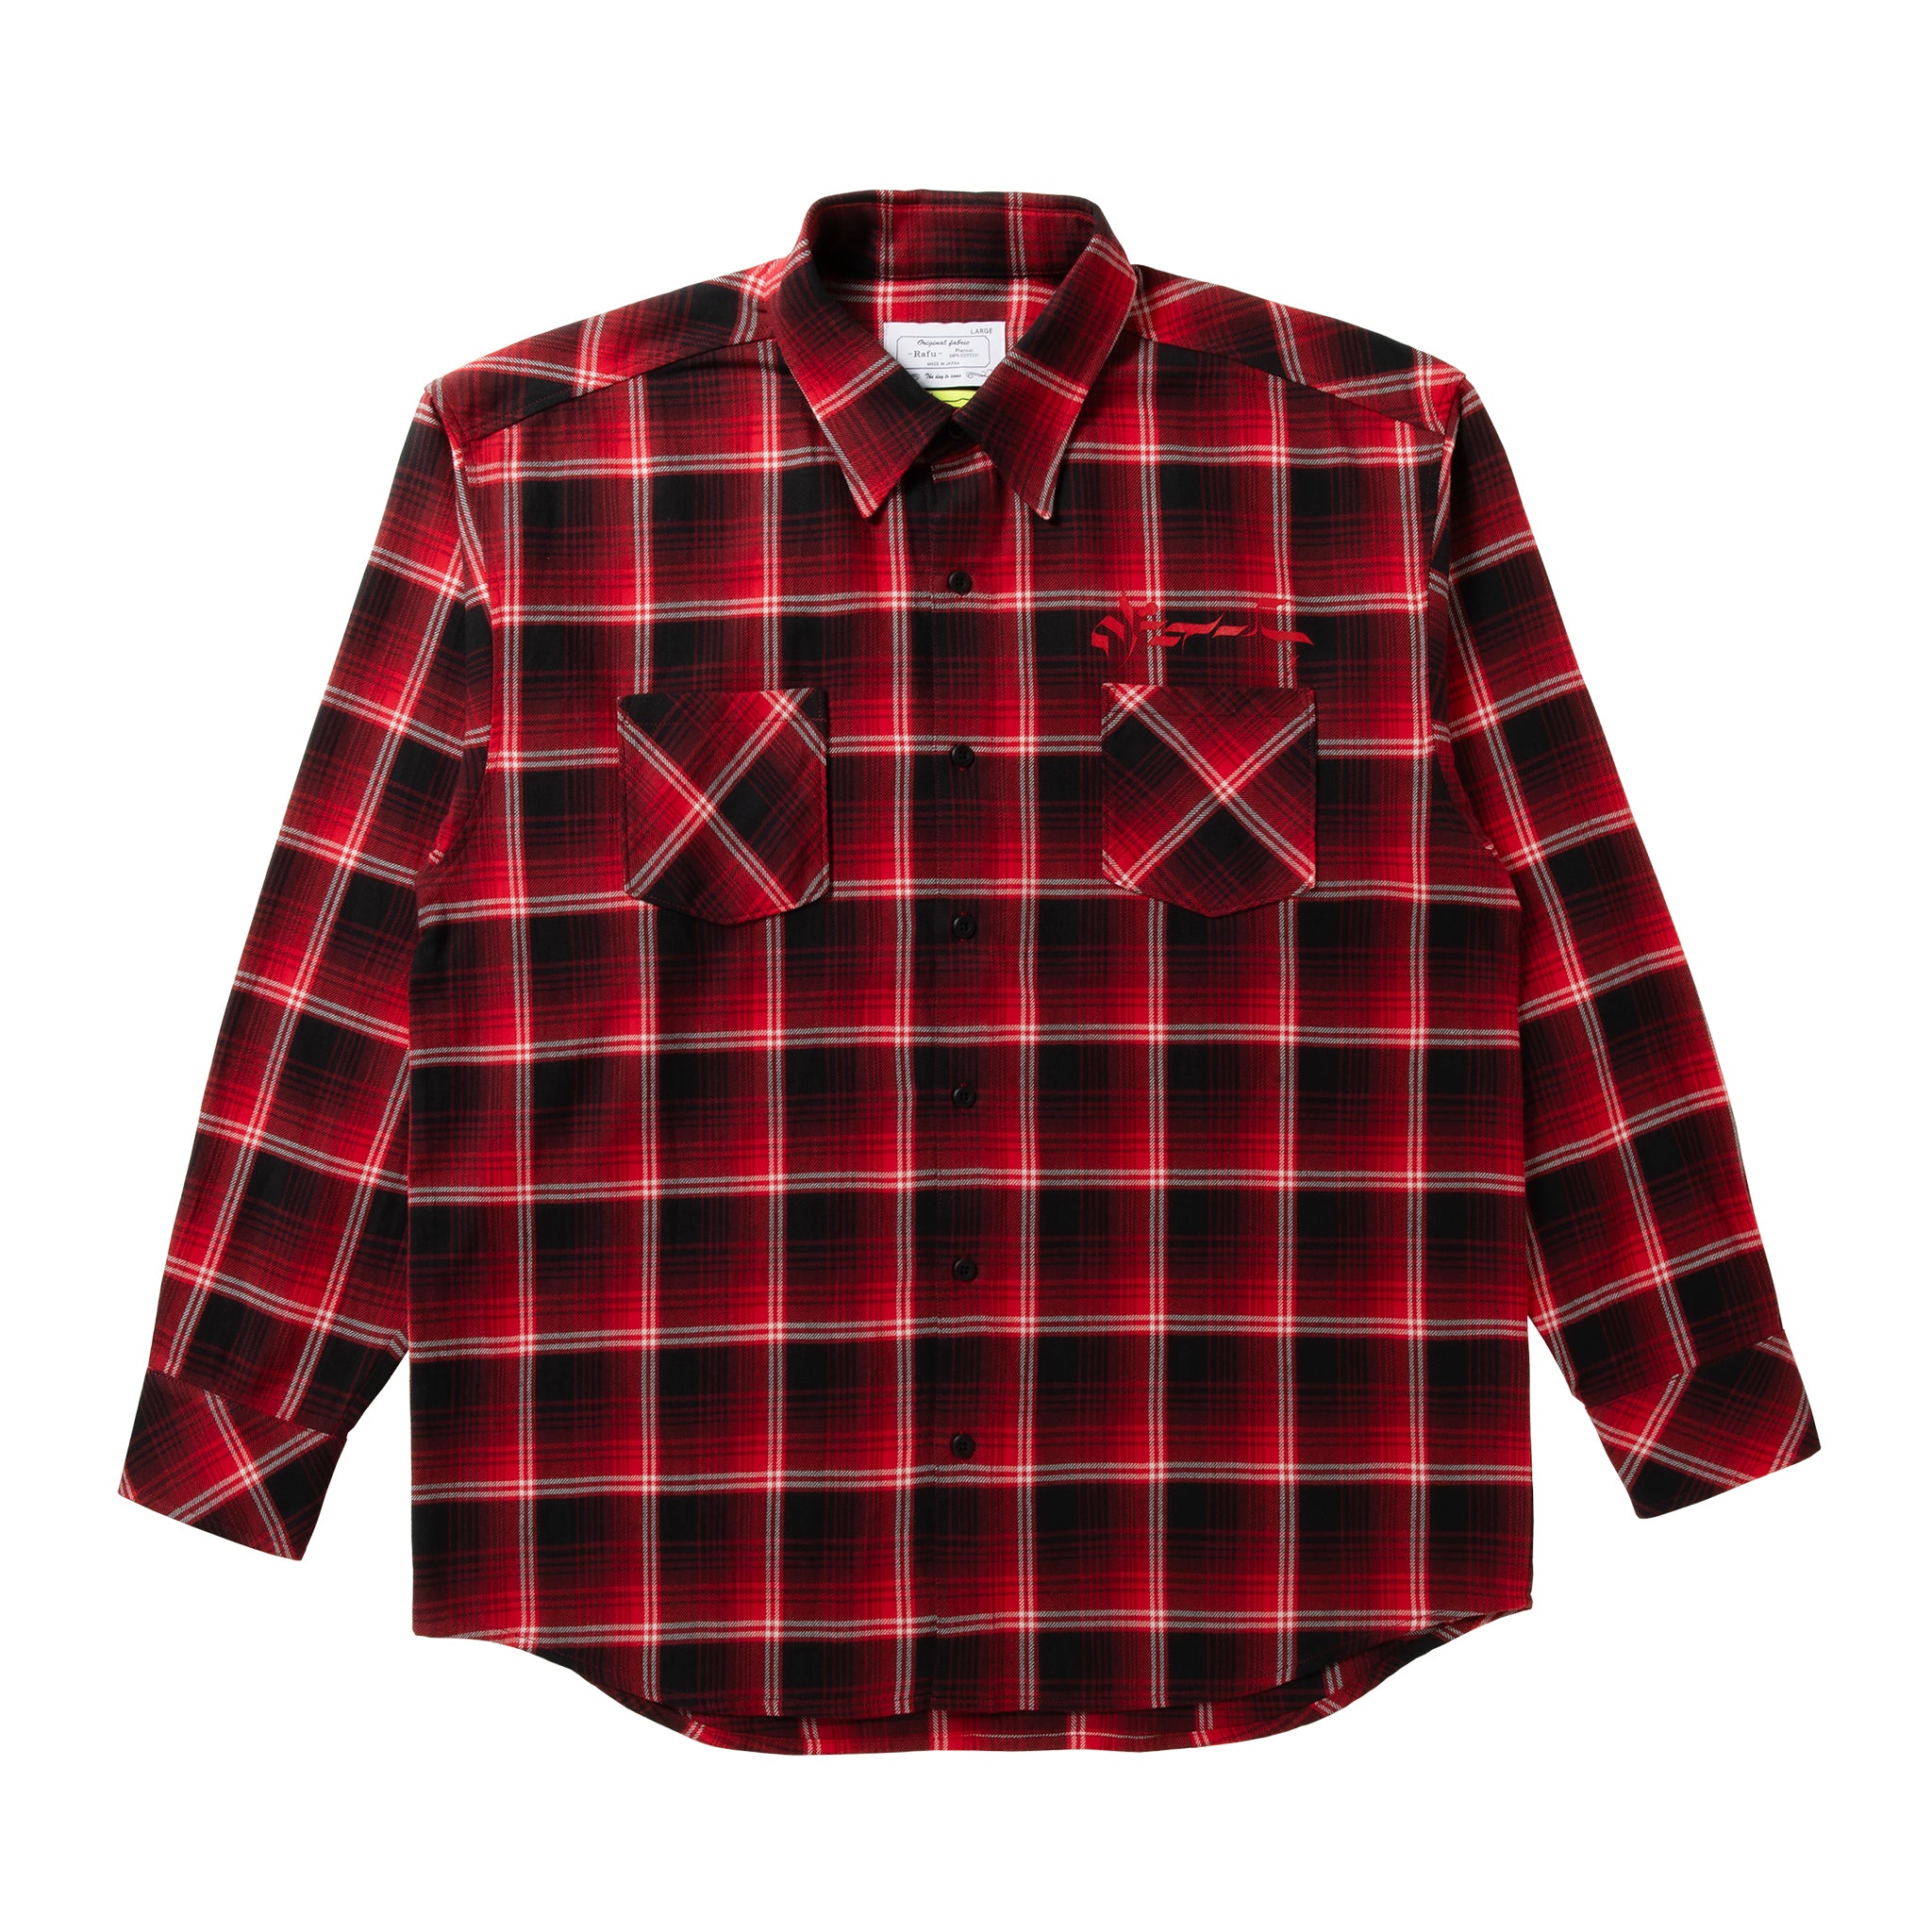 loosejoints≒RAFU - GUCCIMAZE - 'Joints' Flannel shirt (Red)